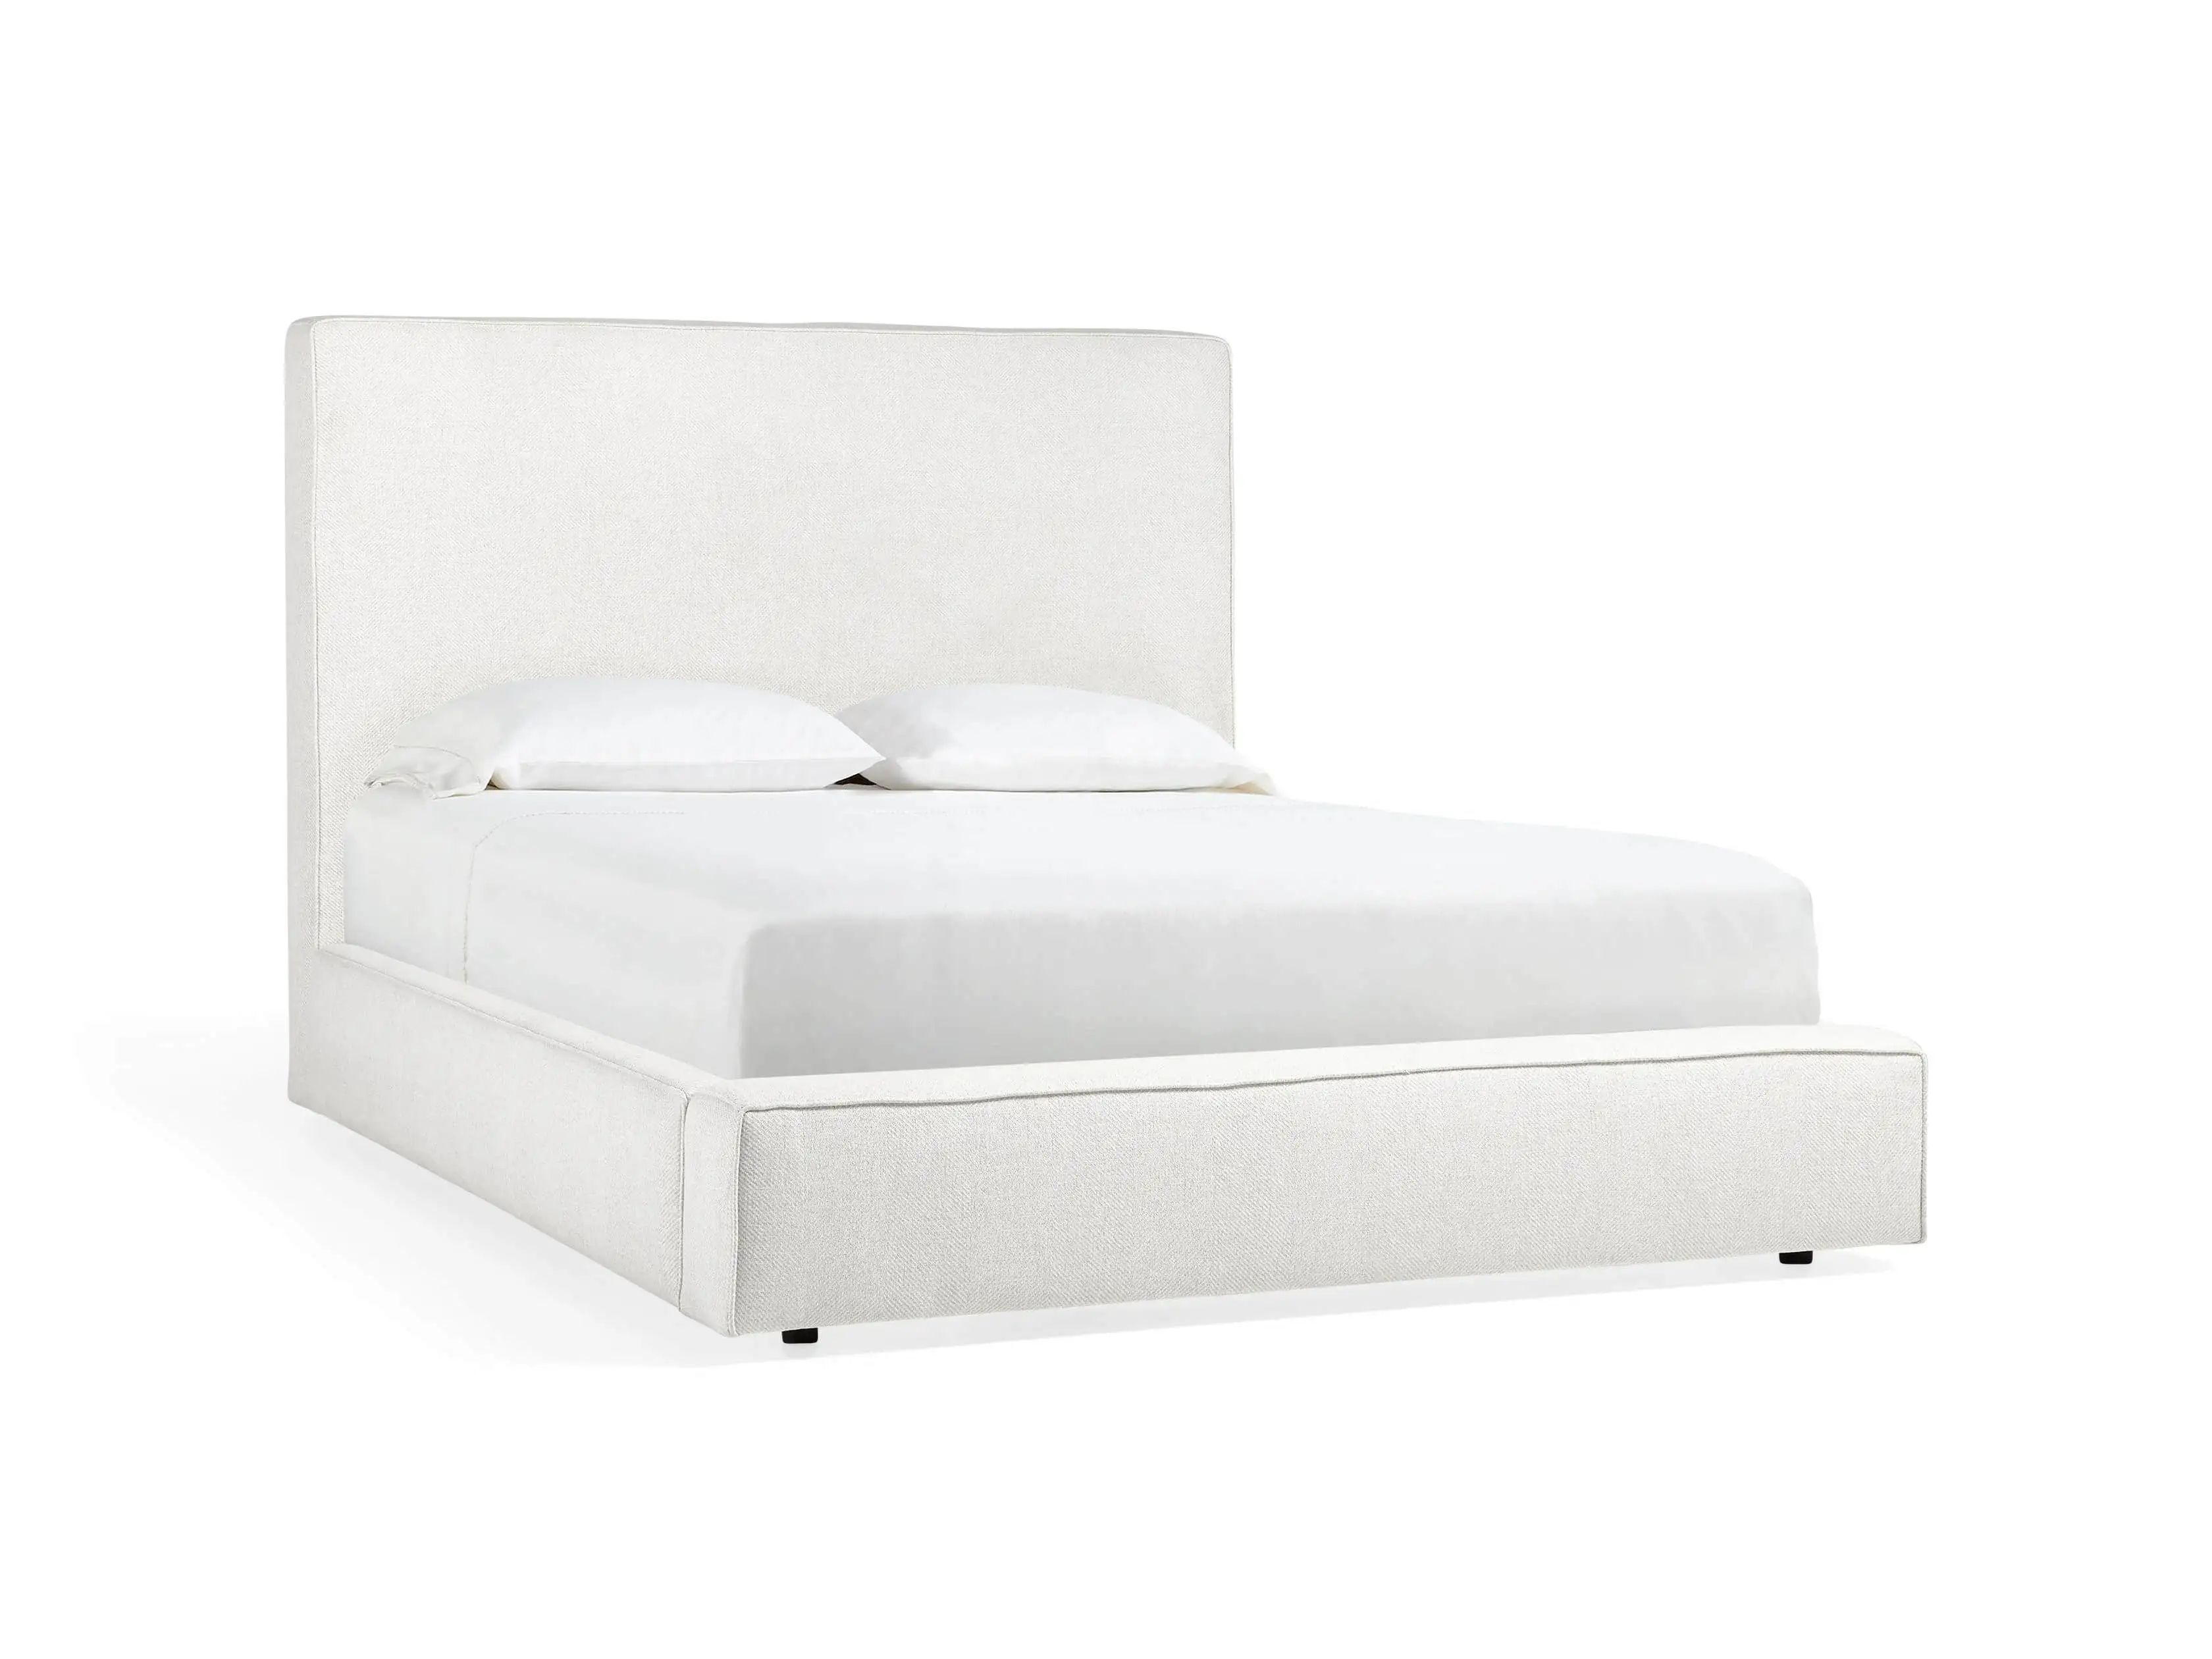 Lago Upholstered 55"" Queen Bed with Low Footboard | Arhaus